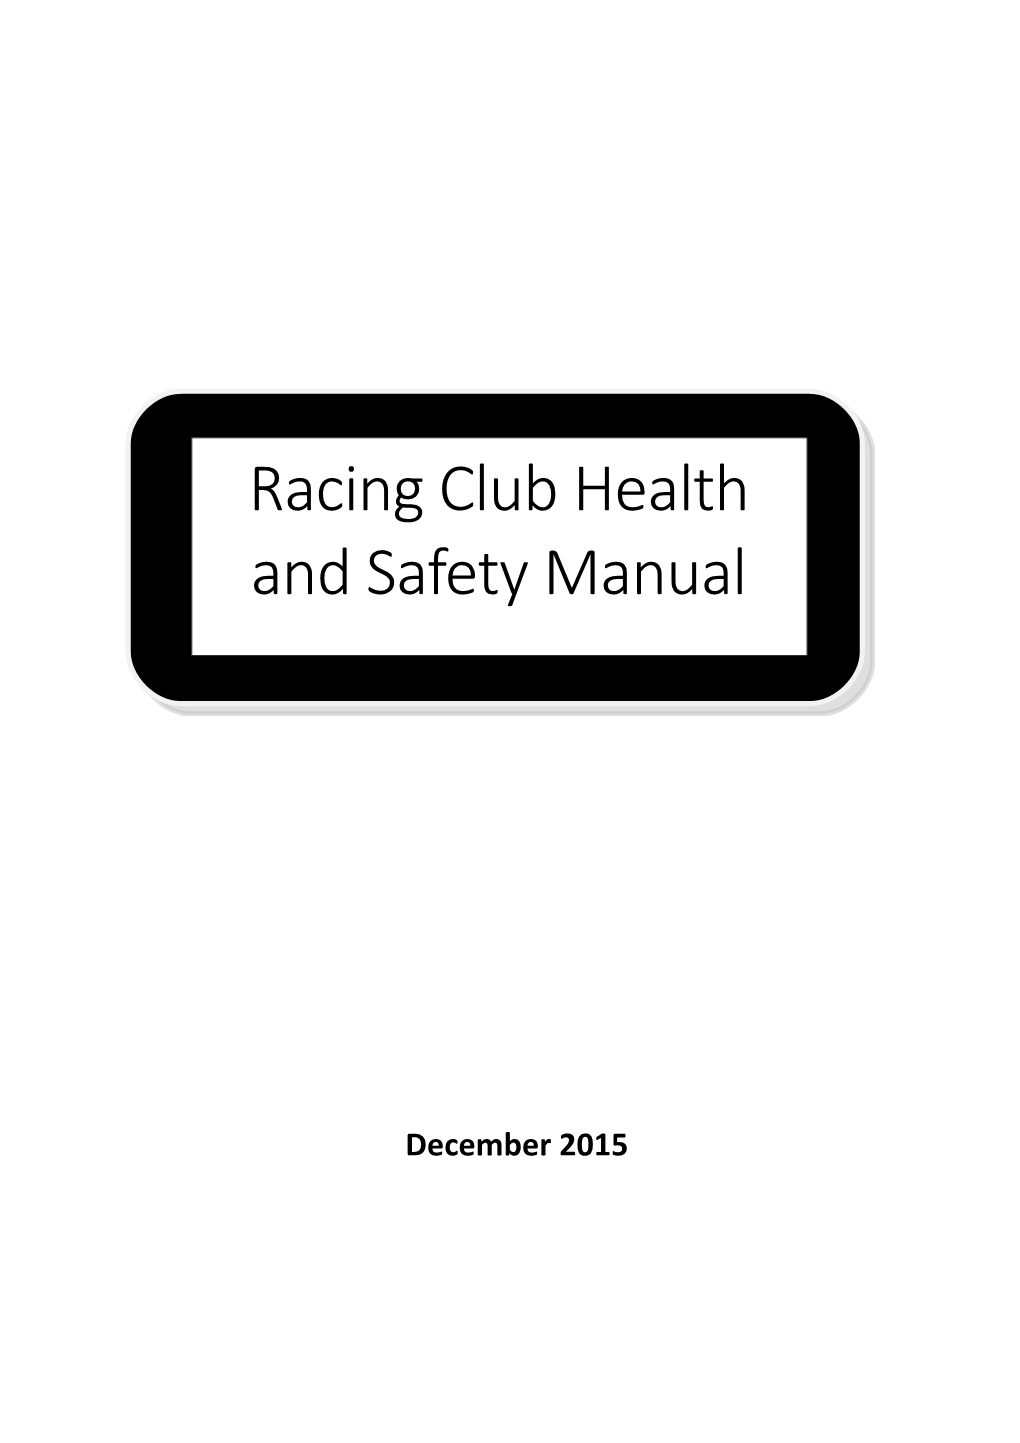 2.Health and Safety Policy Statement